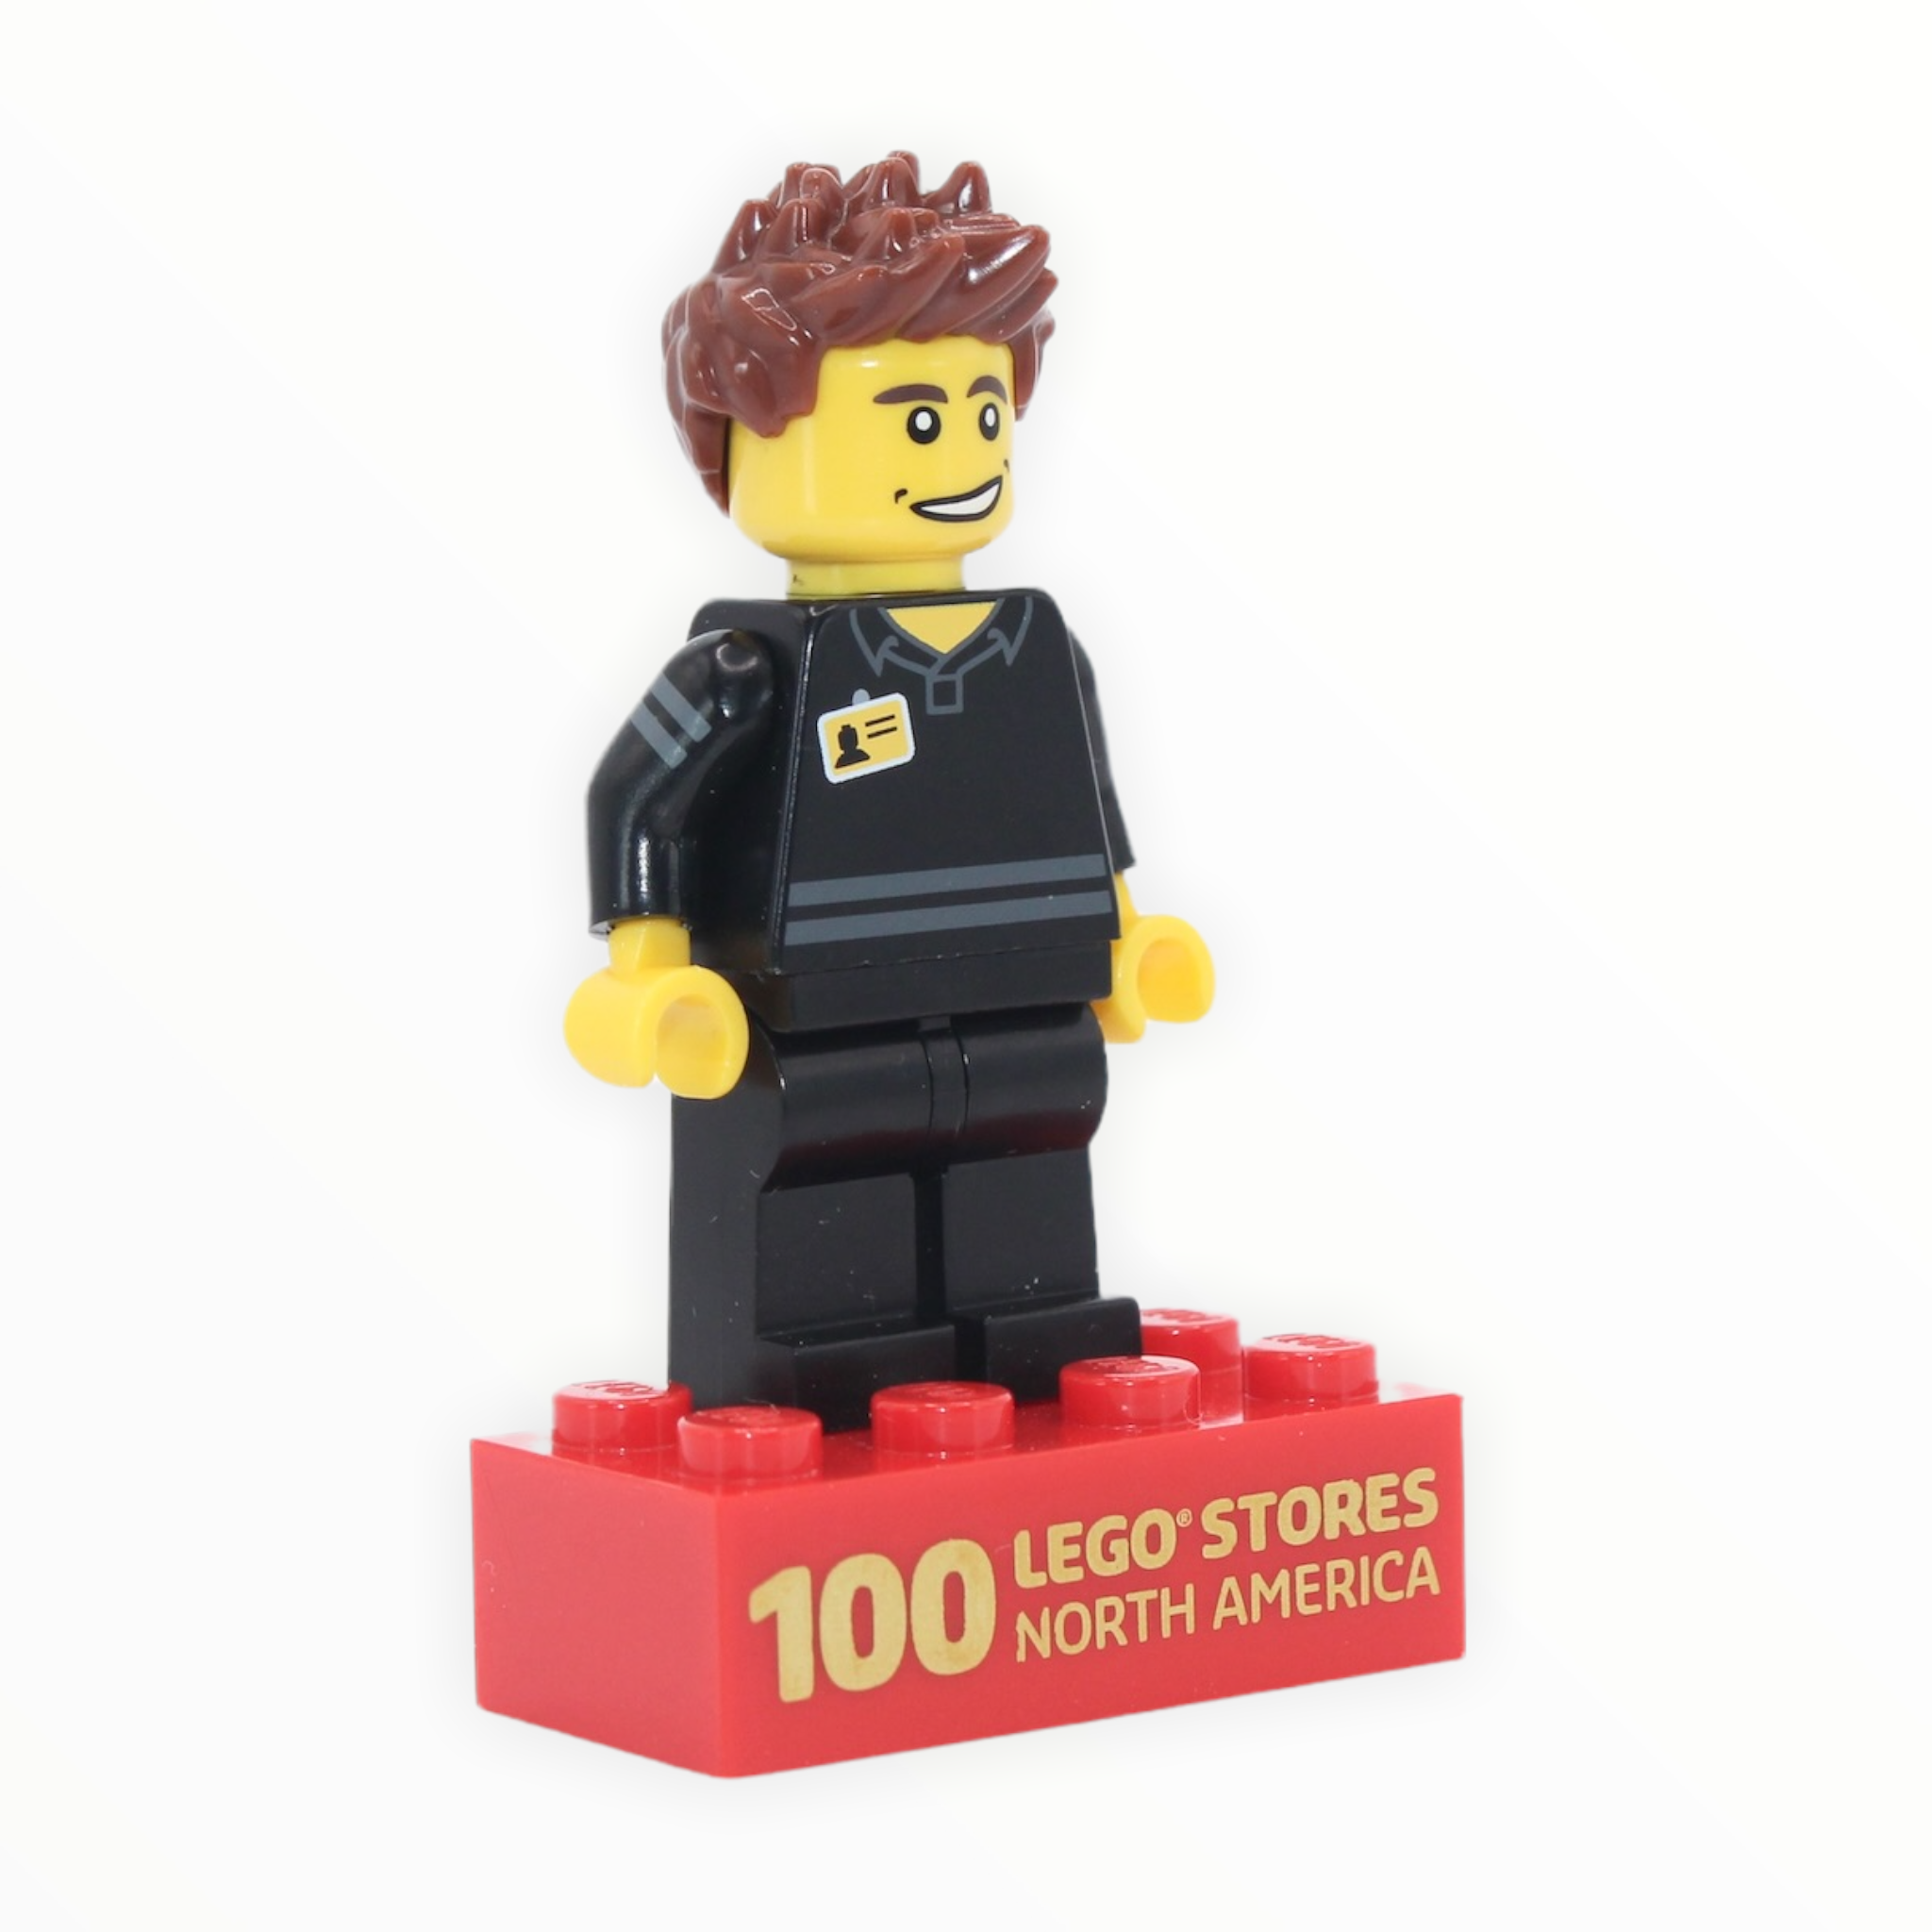 LEGO Brand Store Employee with 100 LEGO Stores Brick (100 Stores back printing on torso)